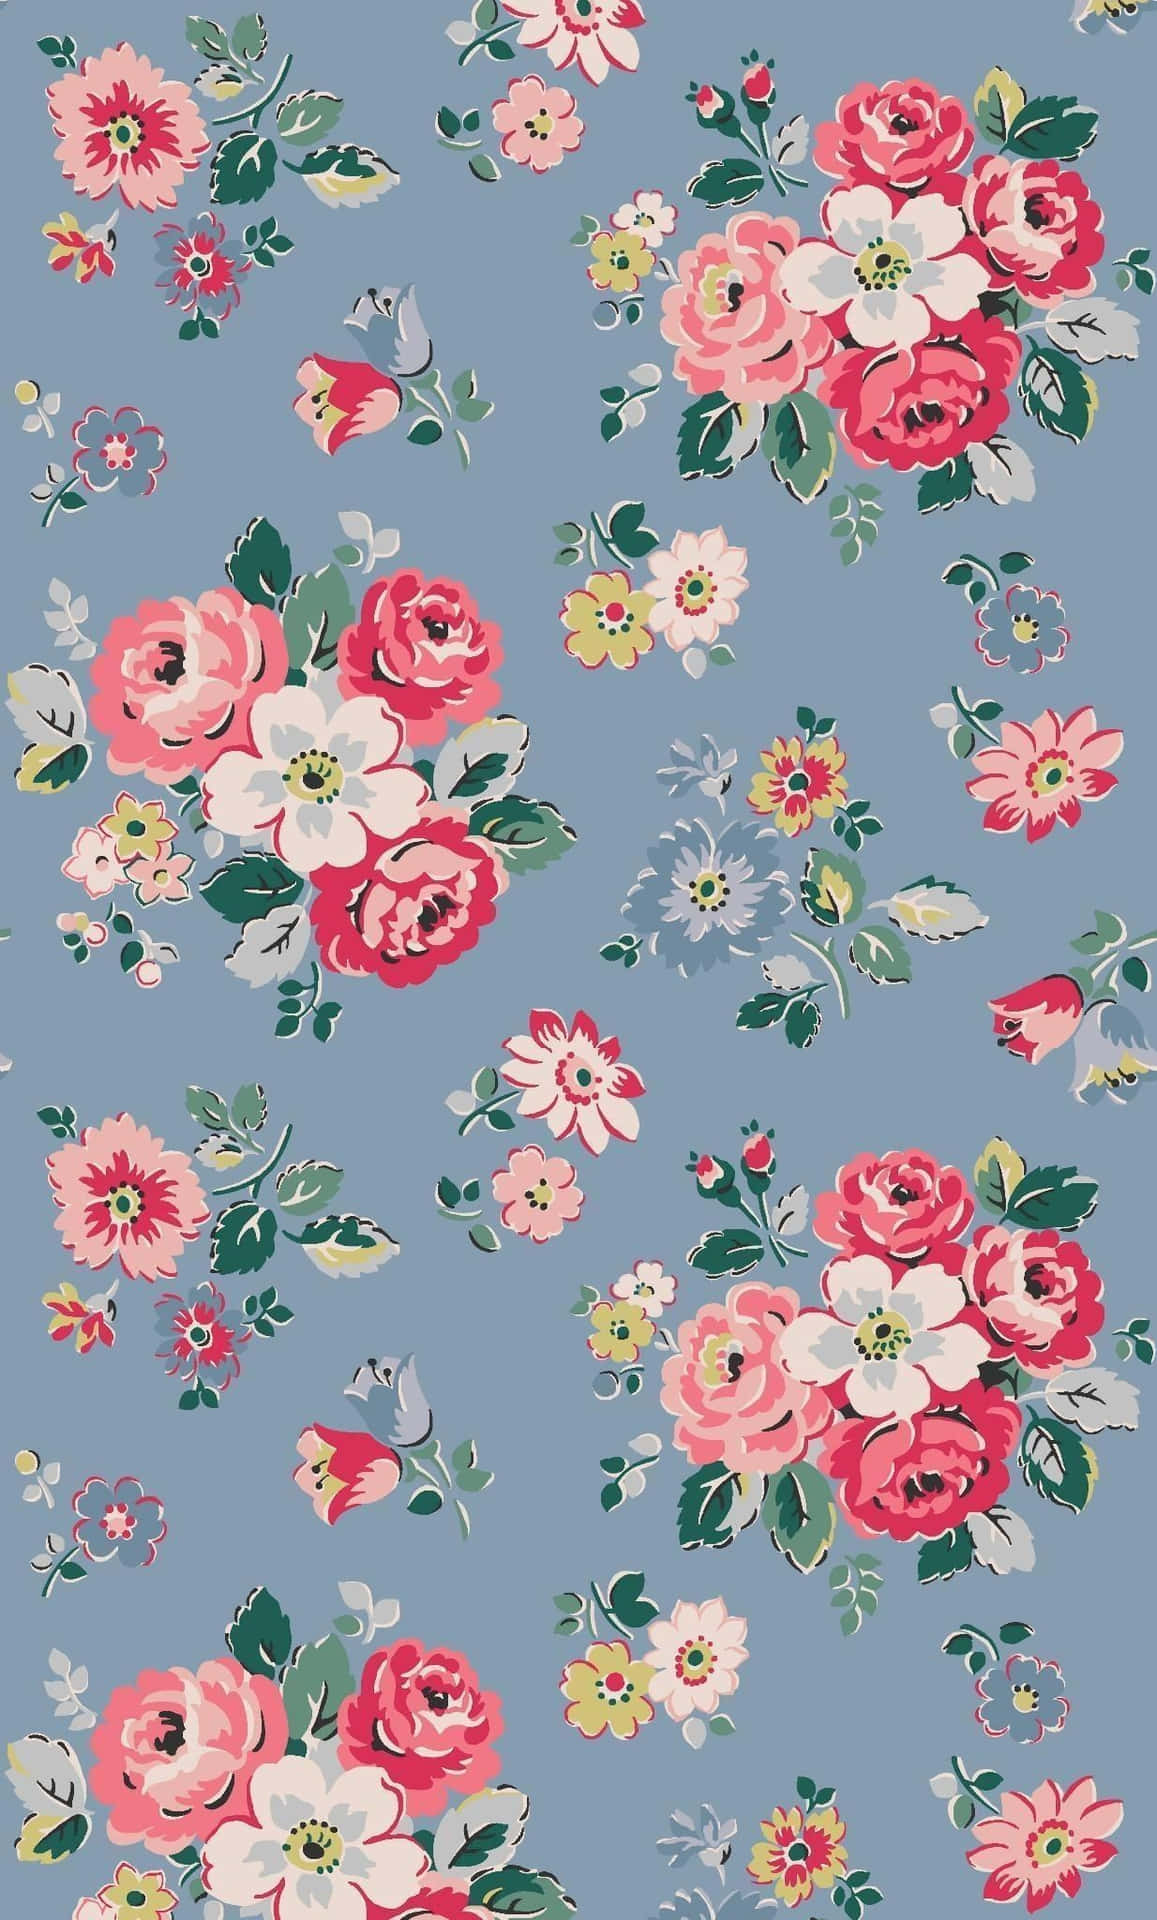 A Floral Pattern On A Blue Background